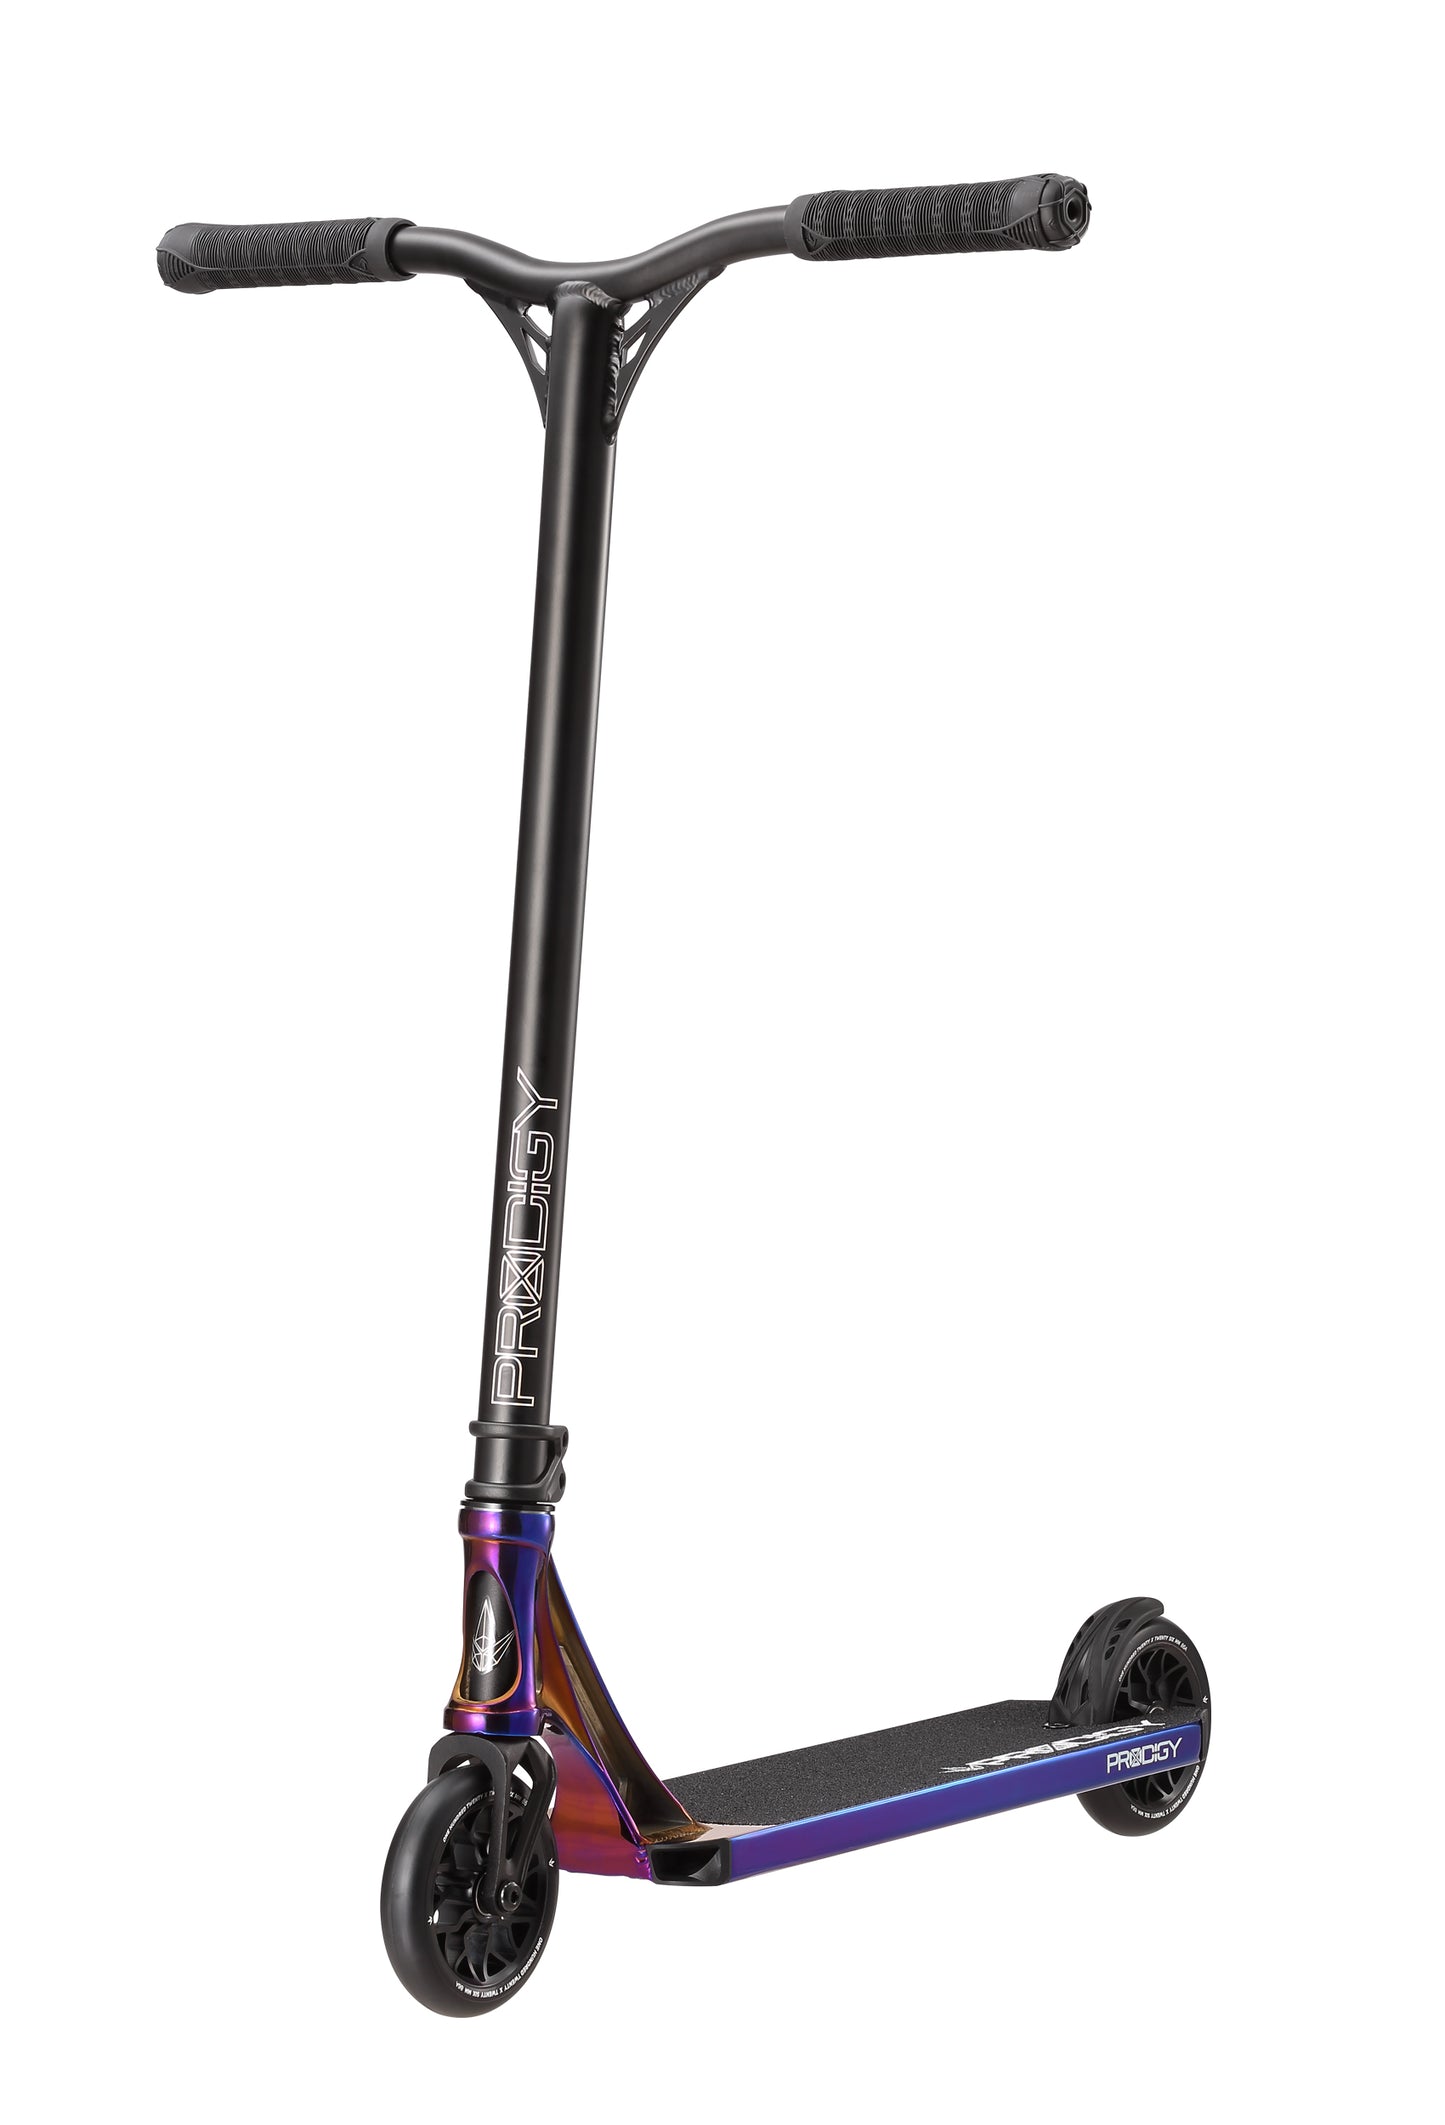 Blunt prodigy x complete pro scooter